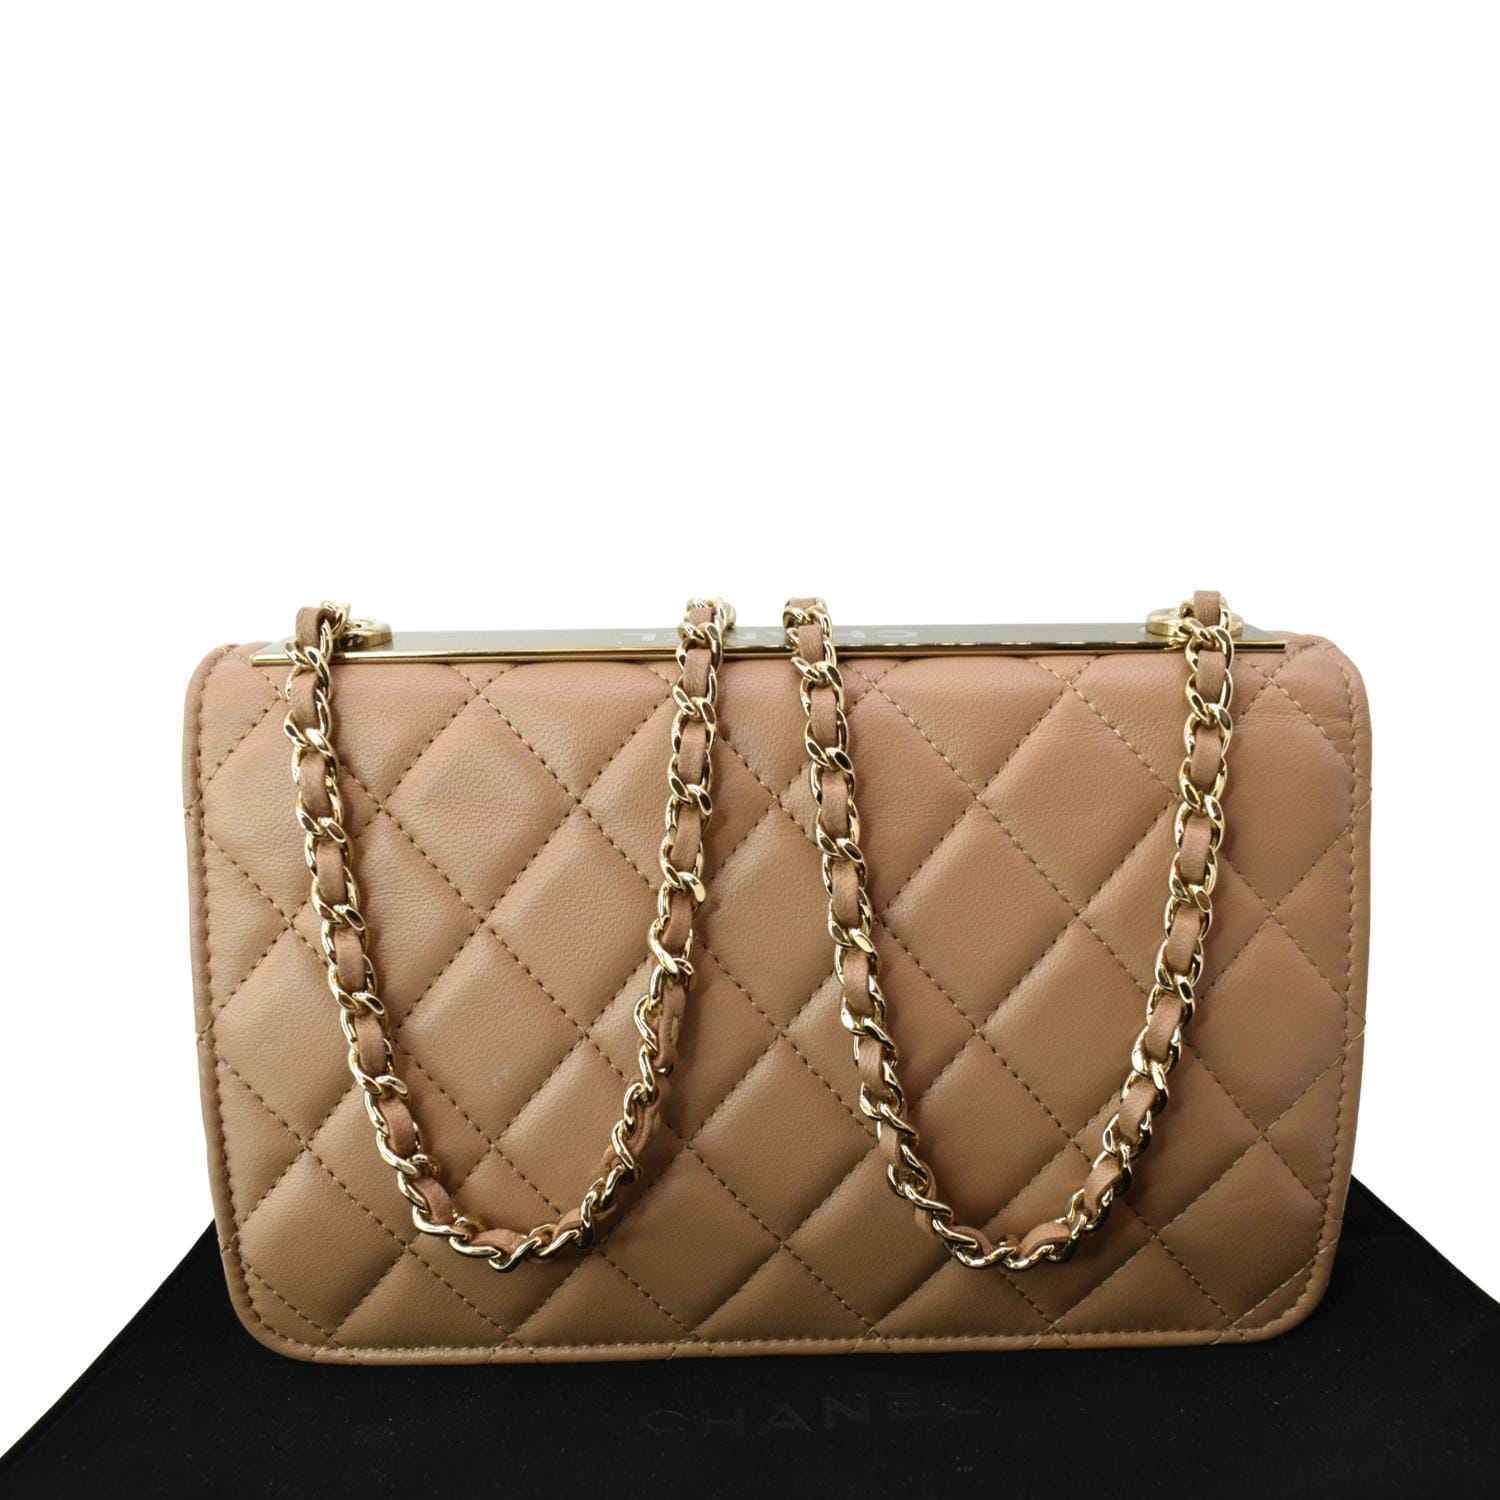 Chanel Beige Quilted Leather Wallet on Double Chain